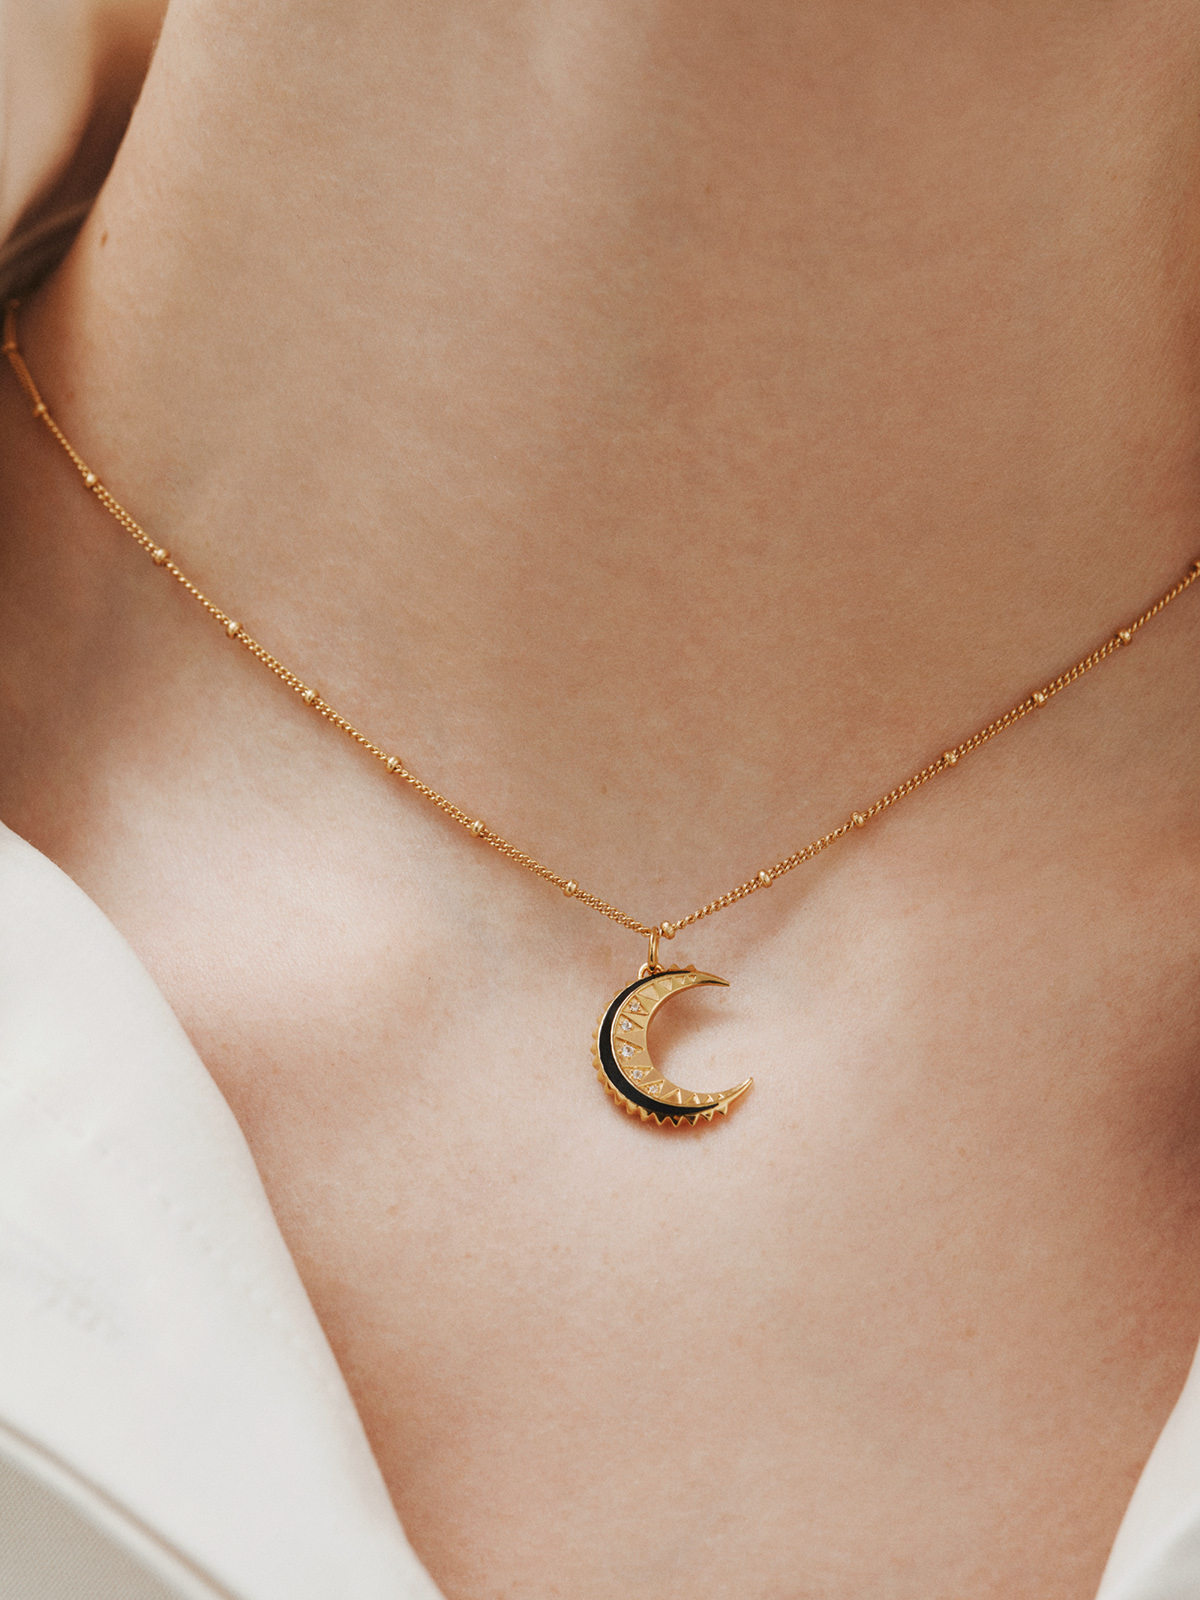 925 silver charm bathed in 18k yellow gold with white tapacios, black enamel and moon shape